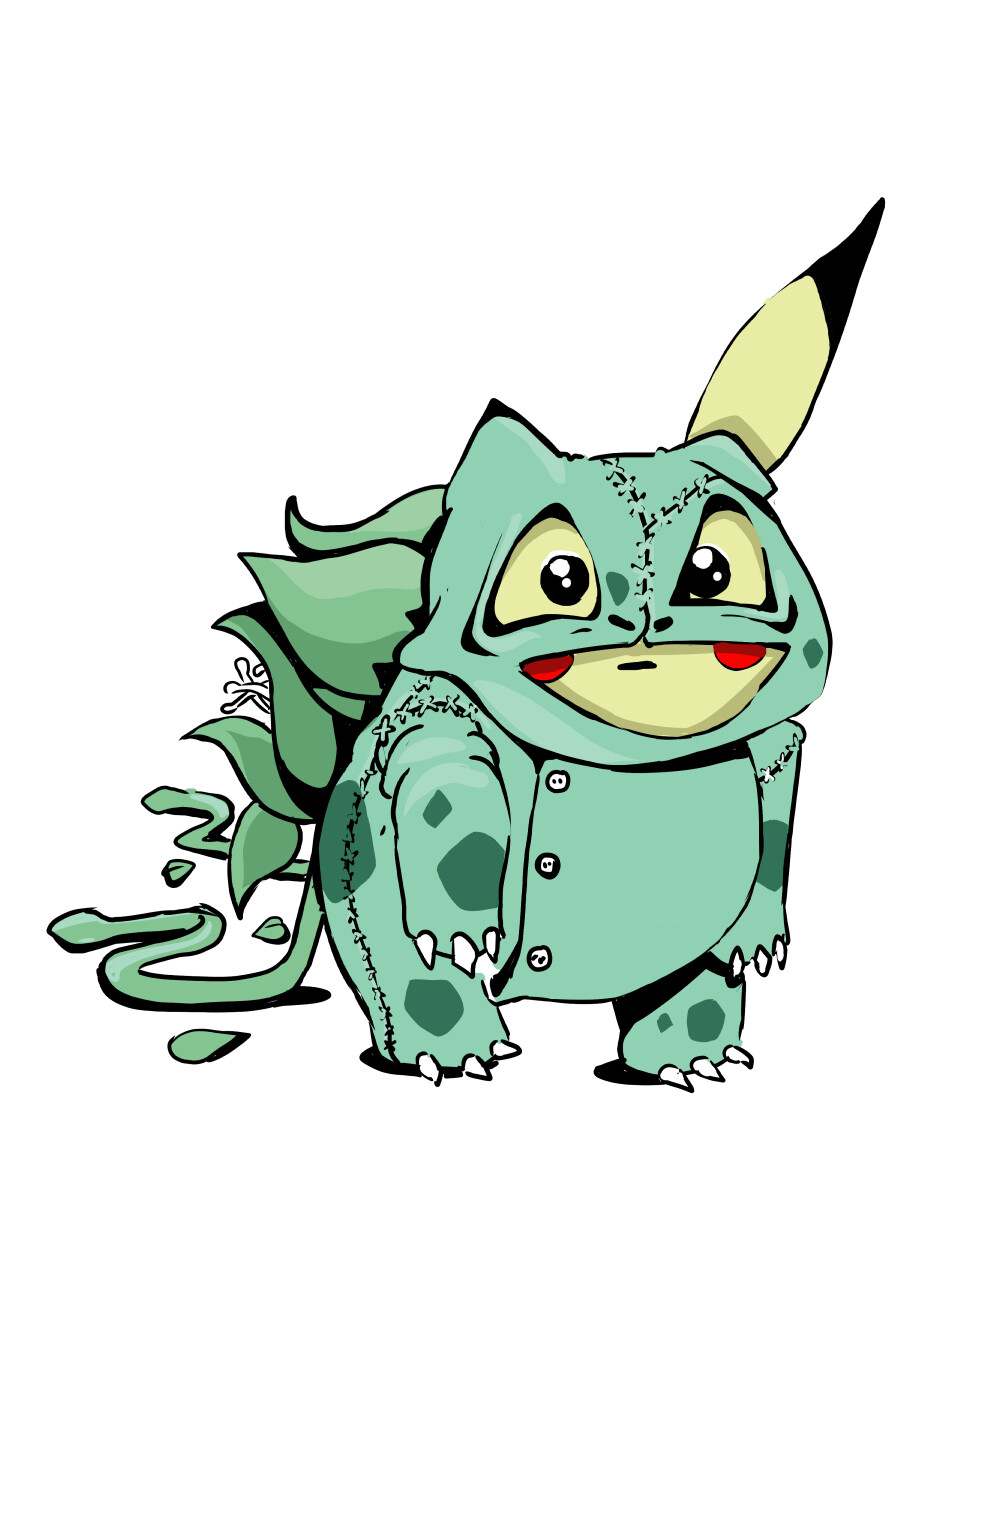 A drawing of a Pikachu in a Bulbasaur skin suit